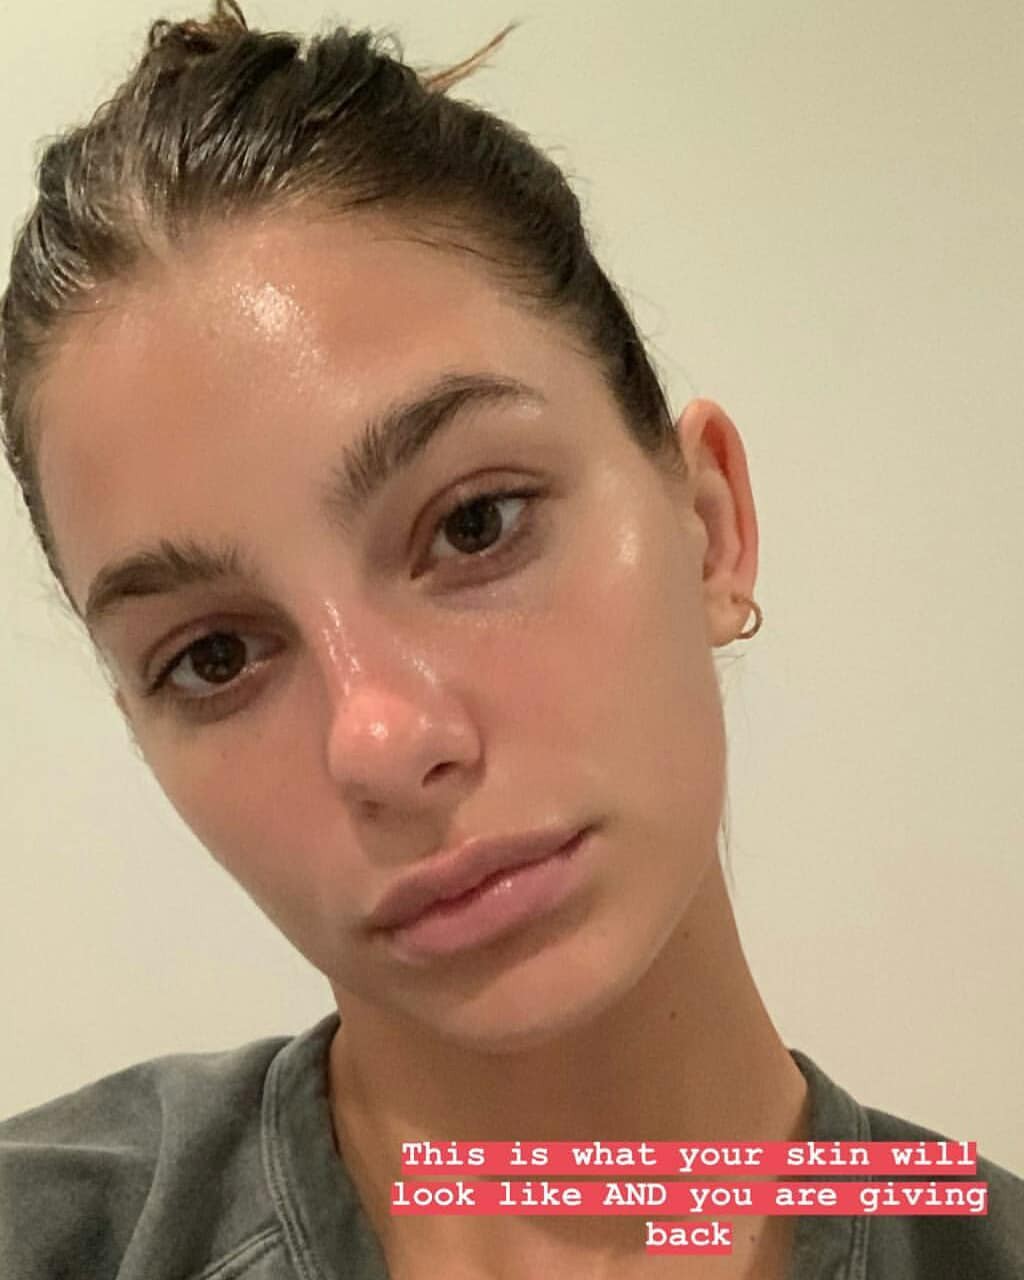 Without makeup Camila Morrone Instagram: Instagram girls,  Instagram pictures,  top Instagram models,  Camila Morrone,  Super Hot Camila Morrone,  Adorable Camila Morrone,  Camila Morrone Instagram  